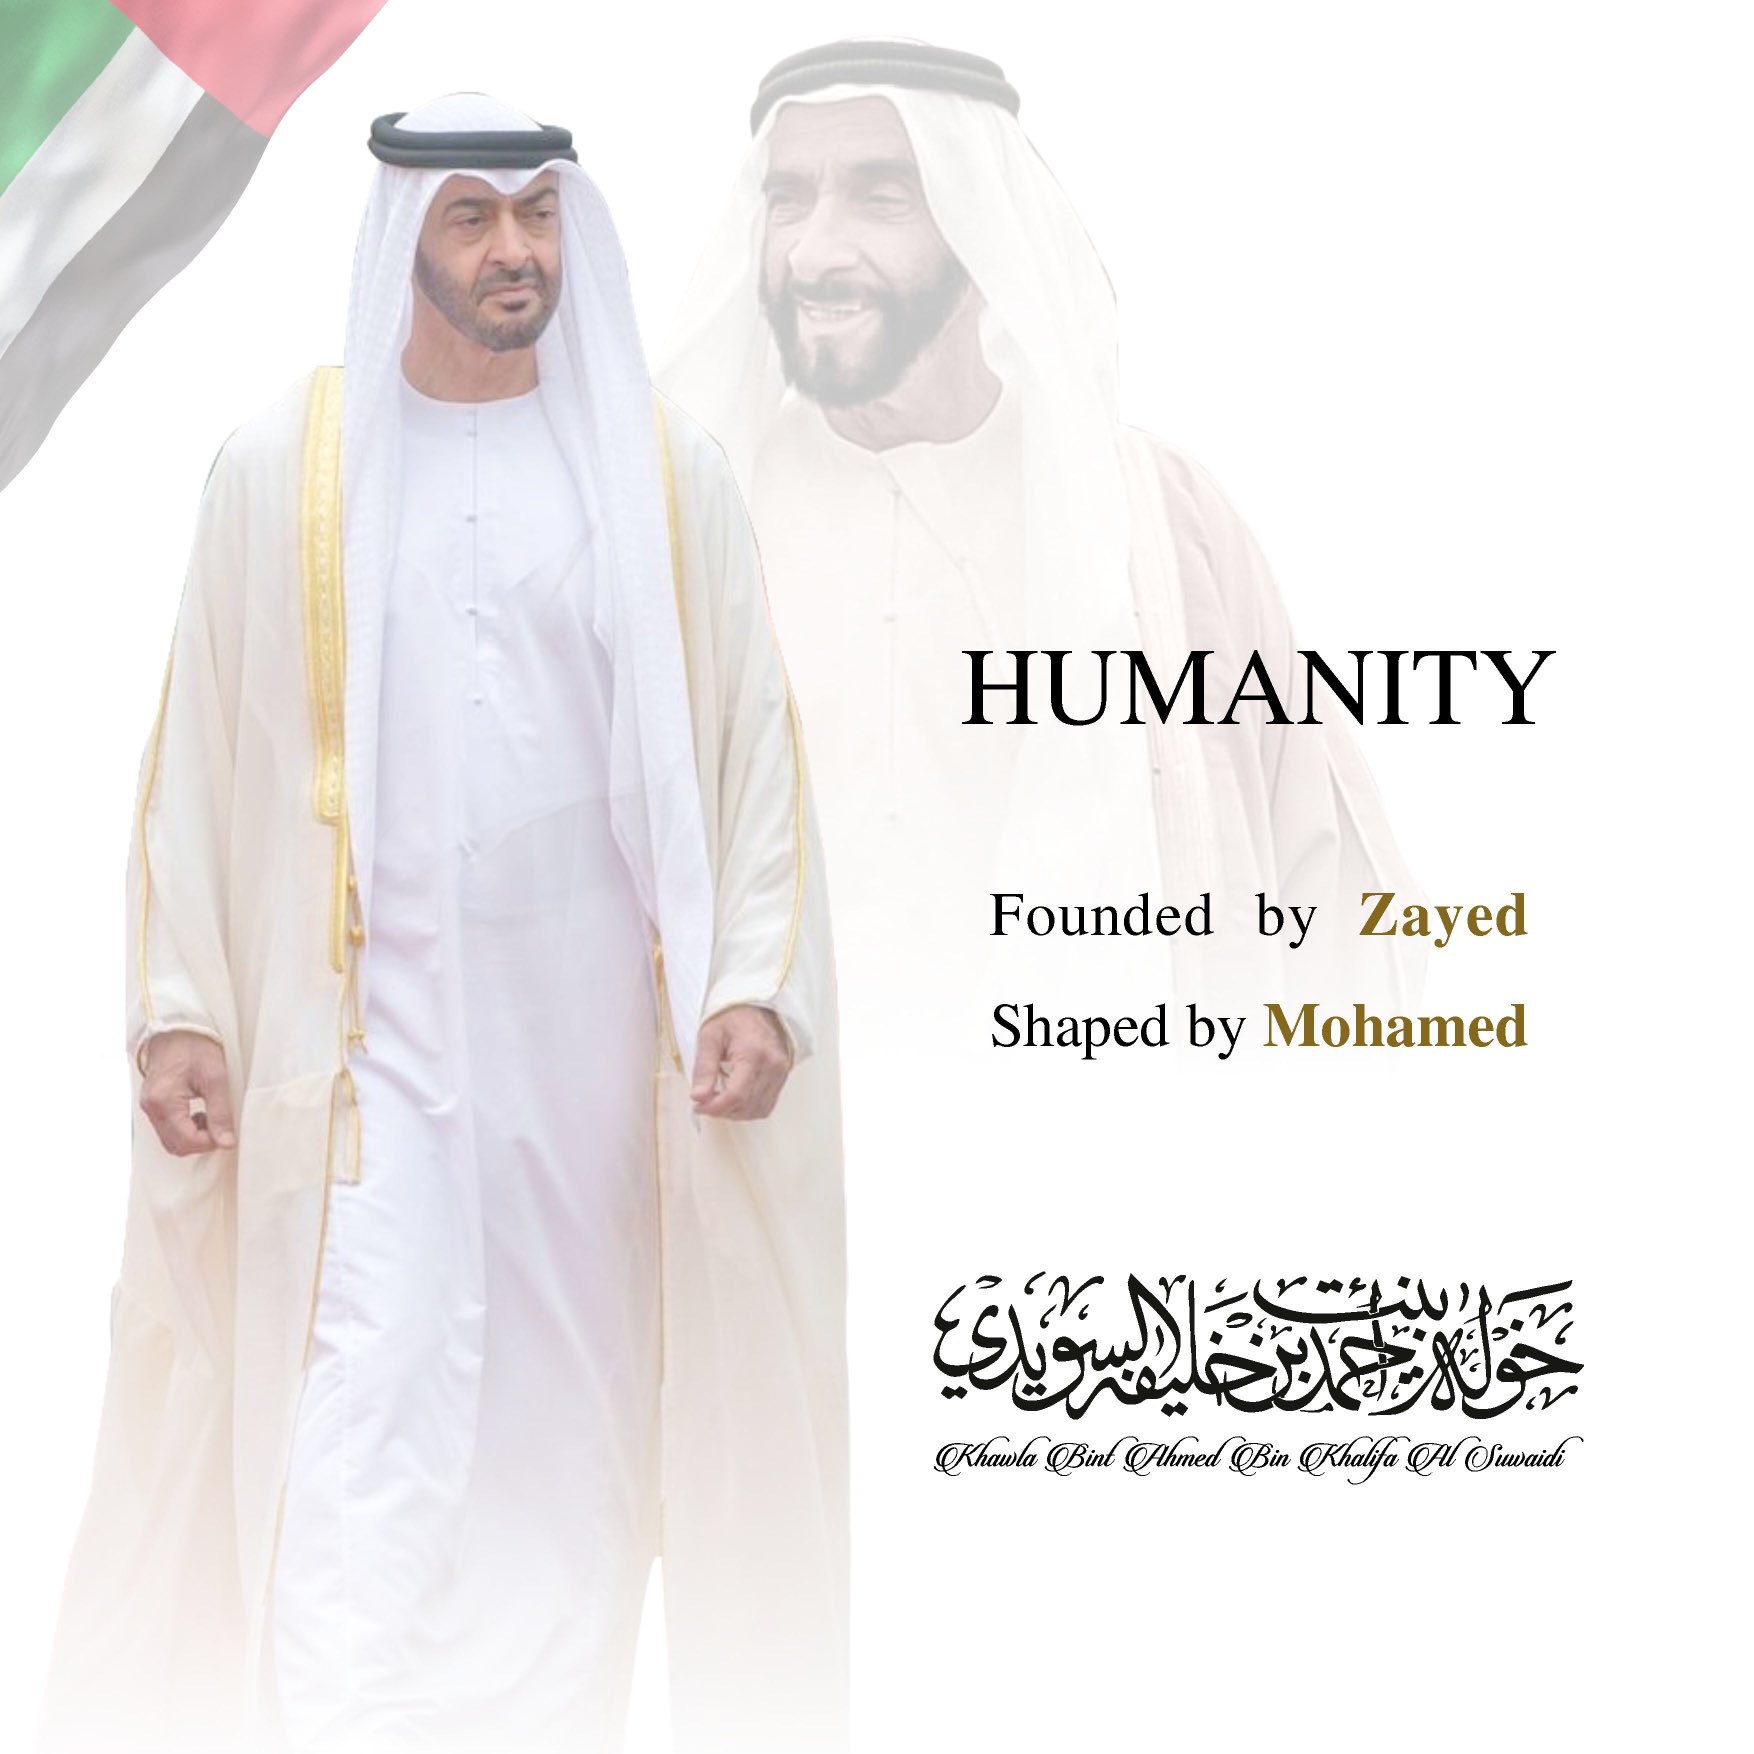 
	Humanity…

	Founded by Zayed

	Shaped by Mohamed
, Her Highness Sheikha Khawla Bint Ahmed Khalifa Al Suwaidi,Khawla Sheikha, Sheikha Khawla, خوله, Khawla Suwaidi,Khawla, khawla al sowaidi,khawla sowaidi,Khawla Al Suwaidi,National Poetry, Poetry, Arabic poems, Arab poet,Arab calligrapher,خوله السويدي, khawla alsuwaidi,khawla al suwaidi, Arab artist,peace and love exhibition at saatchi gallery london, peace & love,arabic poem,arabic poetry,peace and love, peace ,love, خوله  السويدي ,khawla, خوله السويدي , خوله بنت احمد بن خليفه السويدي , خوله   احمد   السويدي  